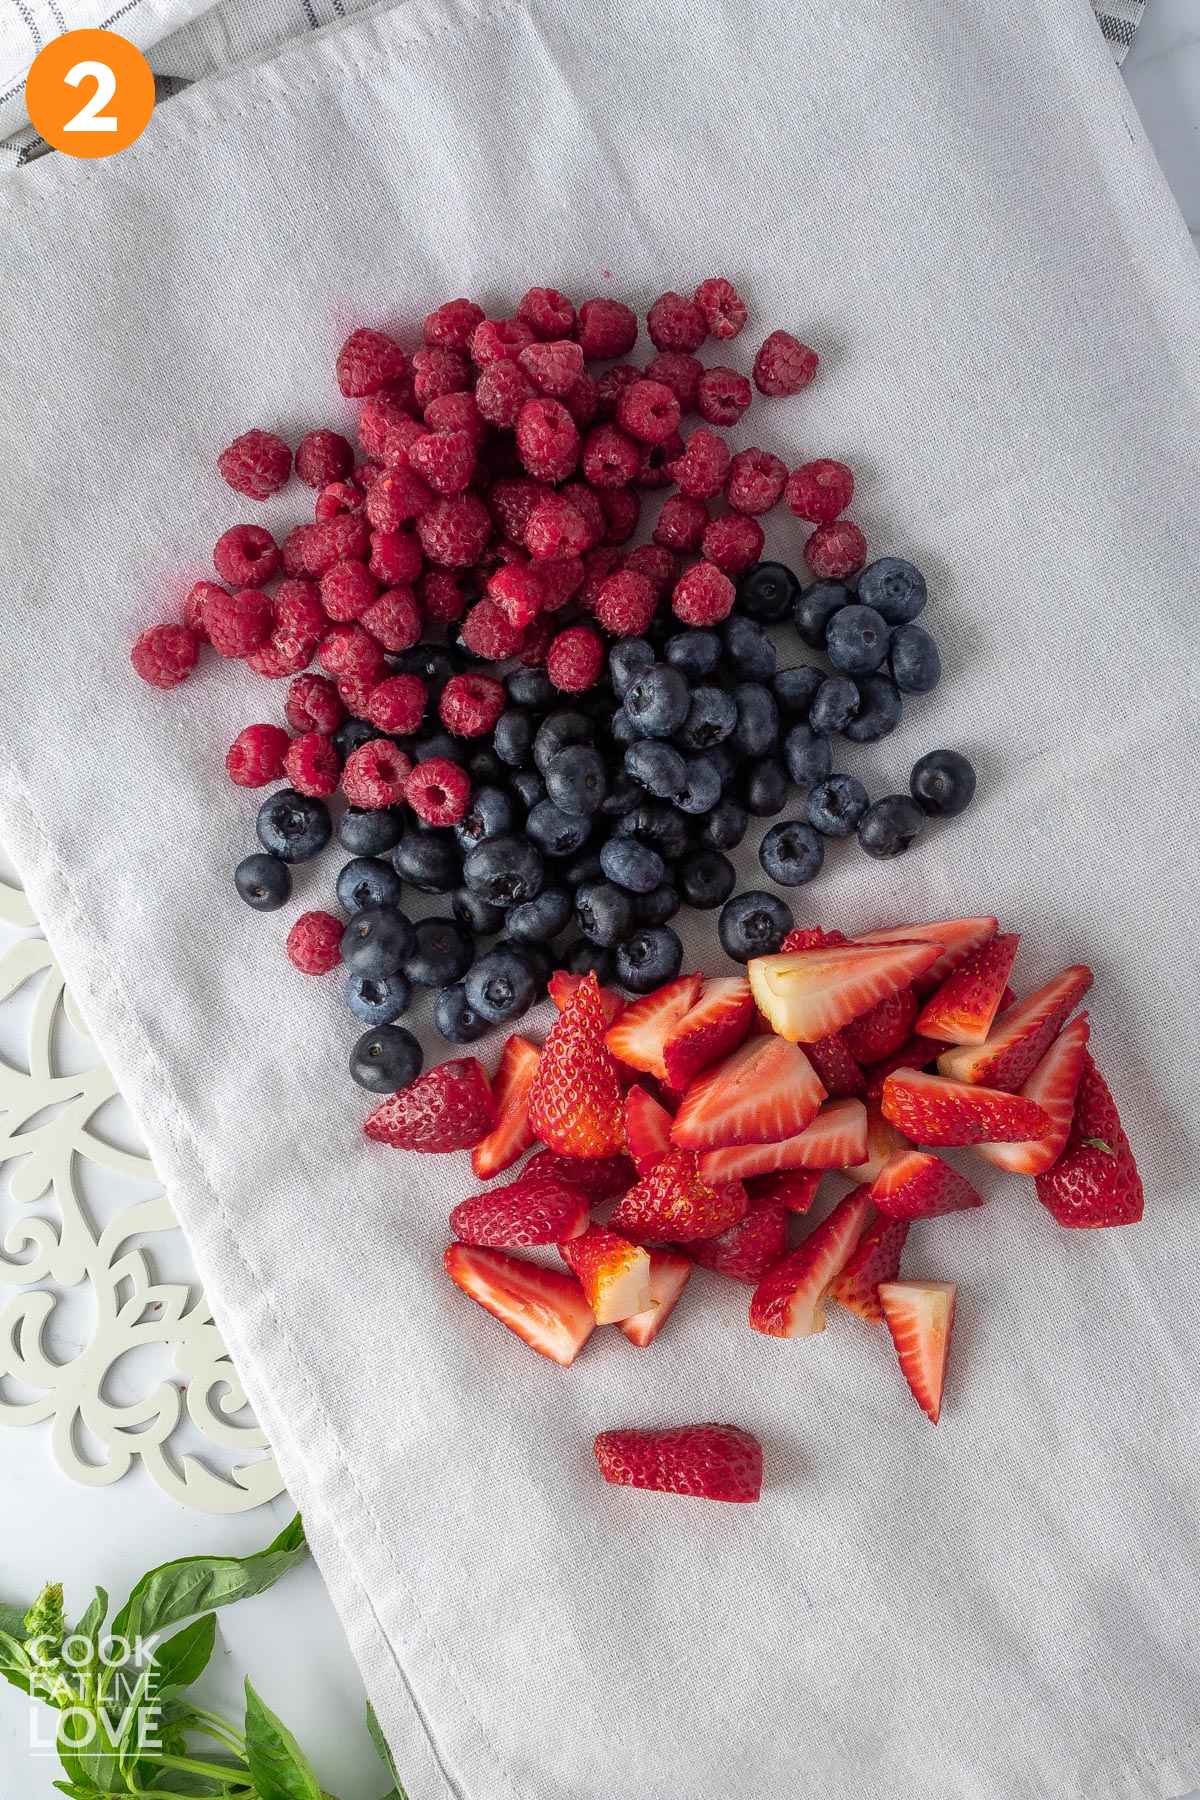 Berries on a towel drying.